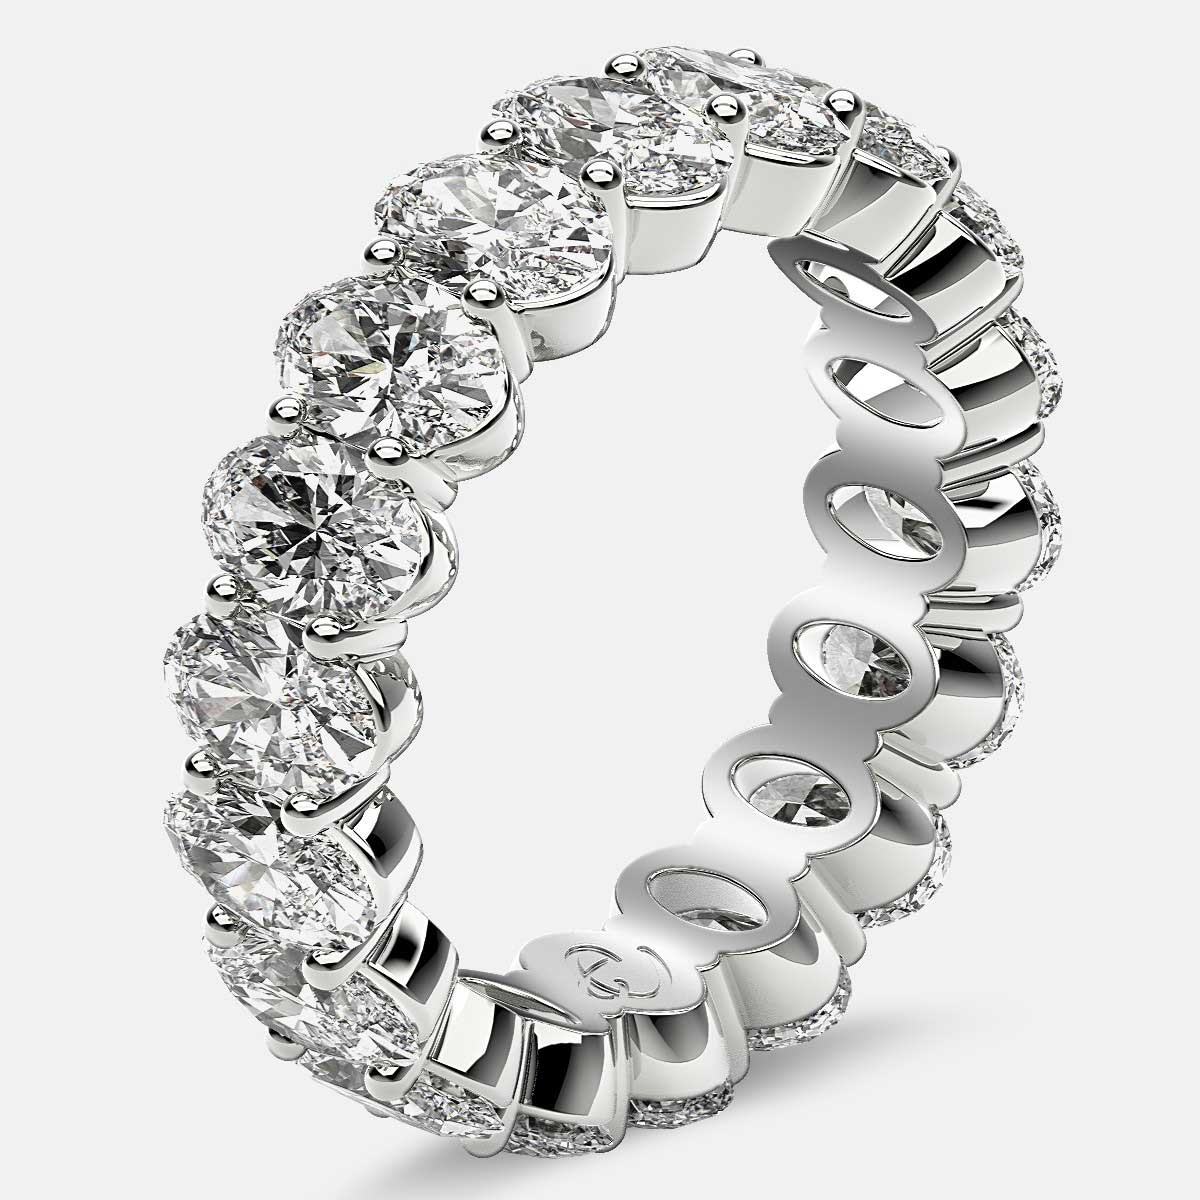 Prong Set Eternity Ring with Oval Diamonds in 18k White Gold